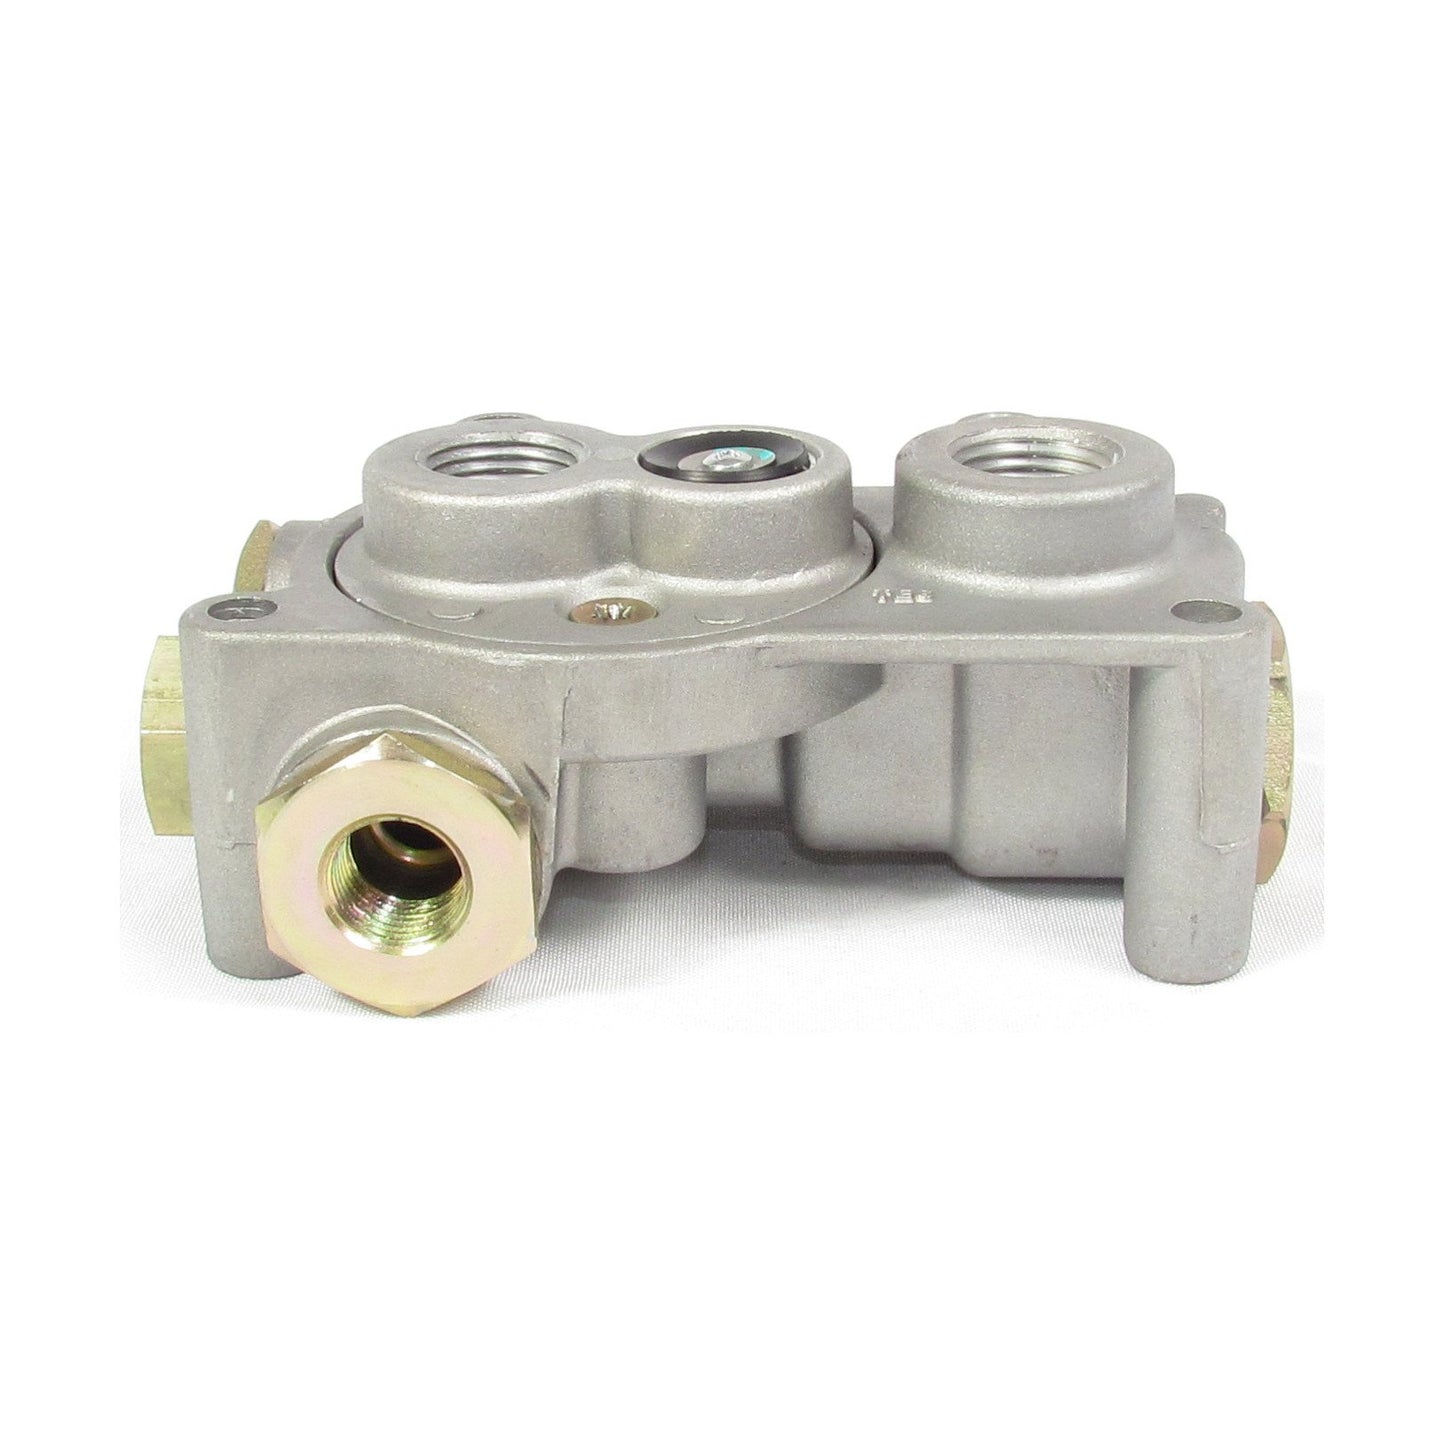 Fortpro TP-5 Type Tractor Protection Valve Replacement for Bendix 288605, Mack 20QE3234 | F224676